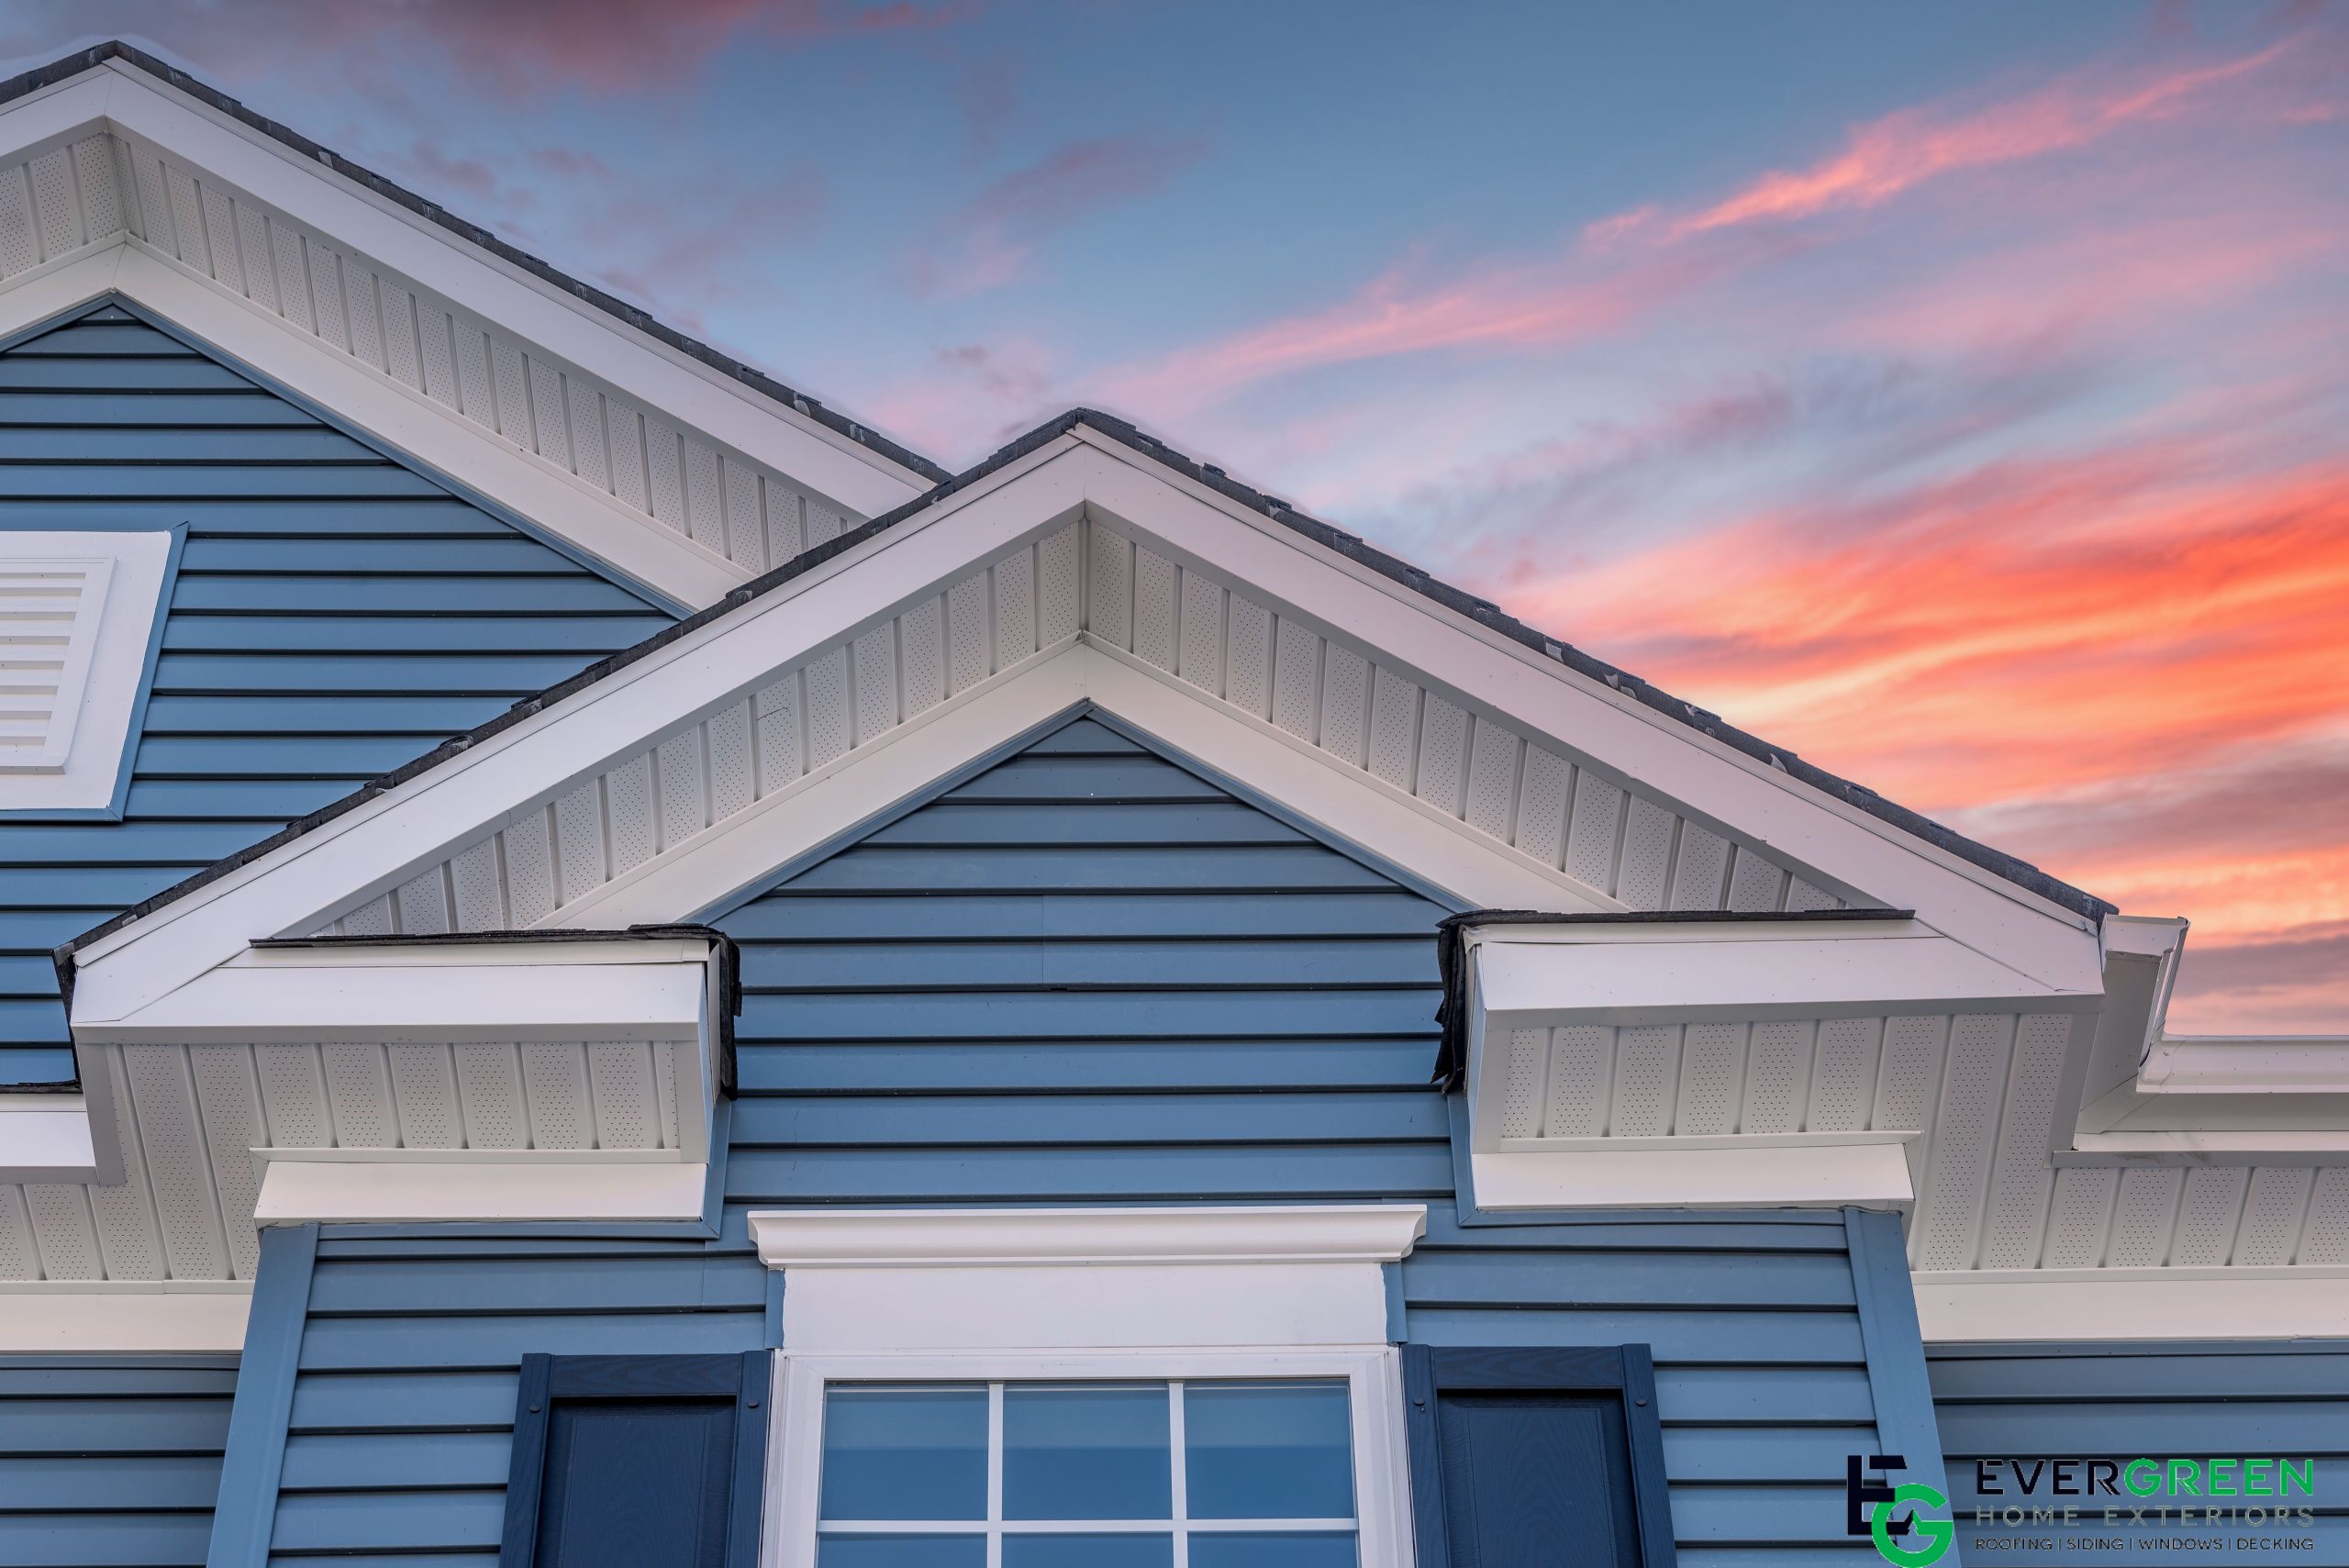 Hire a Siding Contractor for Installations, Repairs, and Replacements for Your North Bend Home!